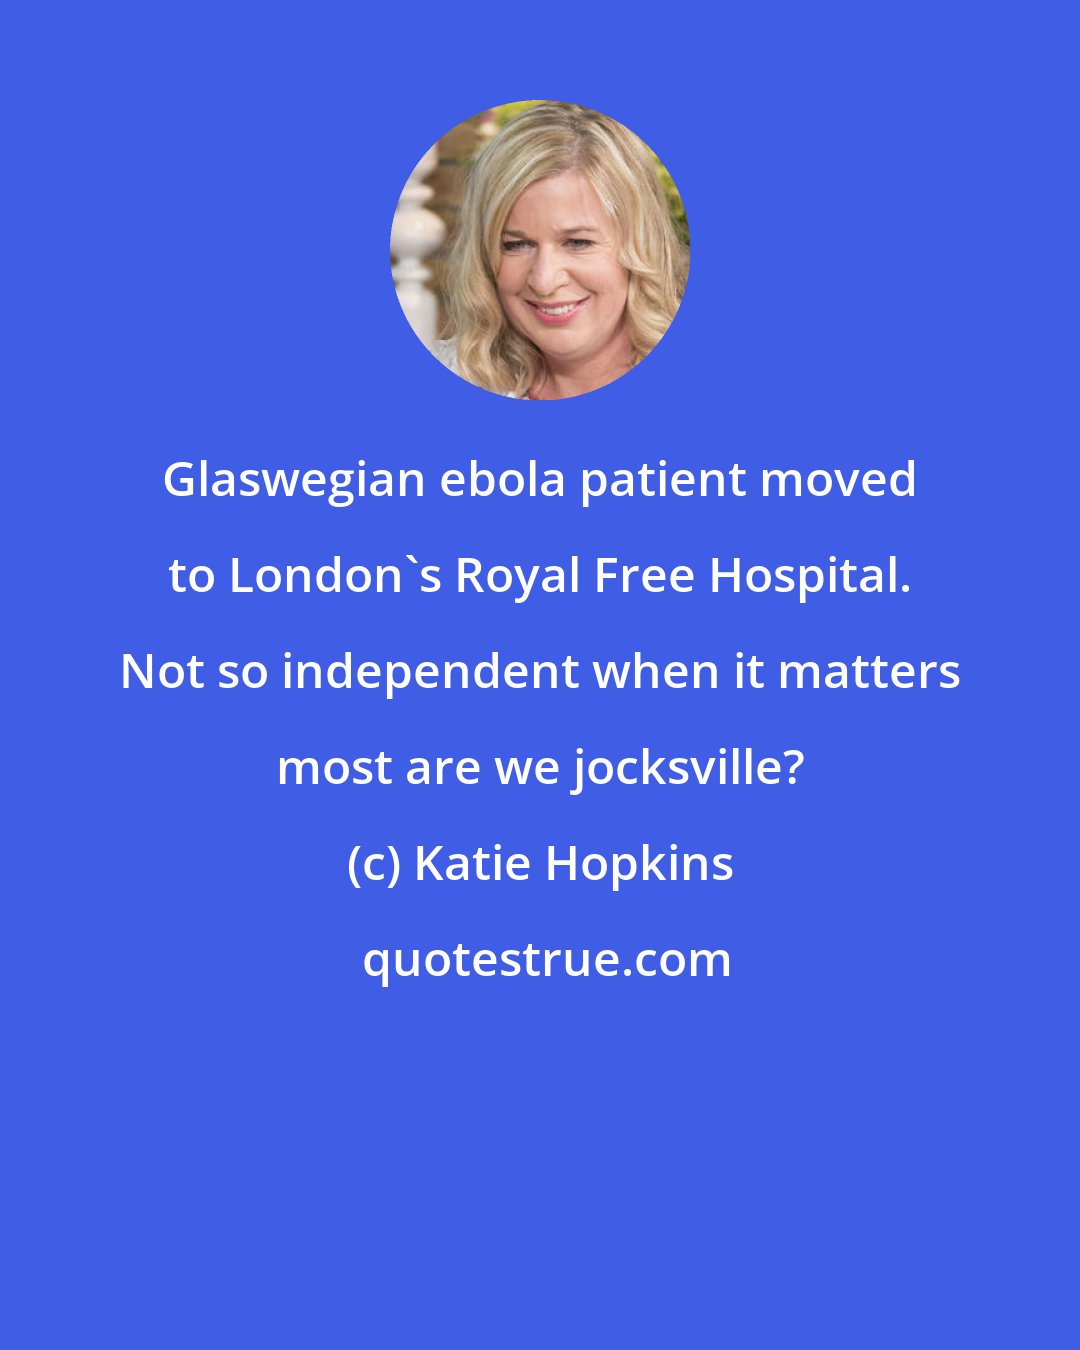 Katie Hopkins: Glaswegian ebola patient moved to London's Royal Free Hospital. Not so independent when it matters most are we jocksville?